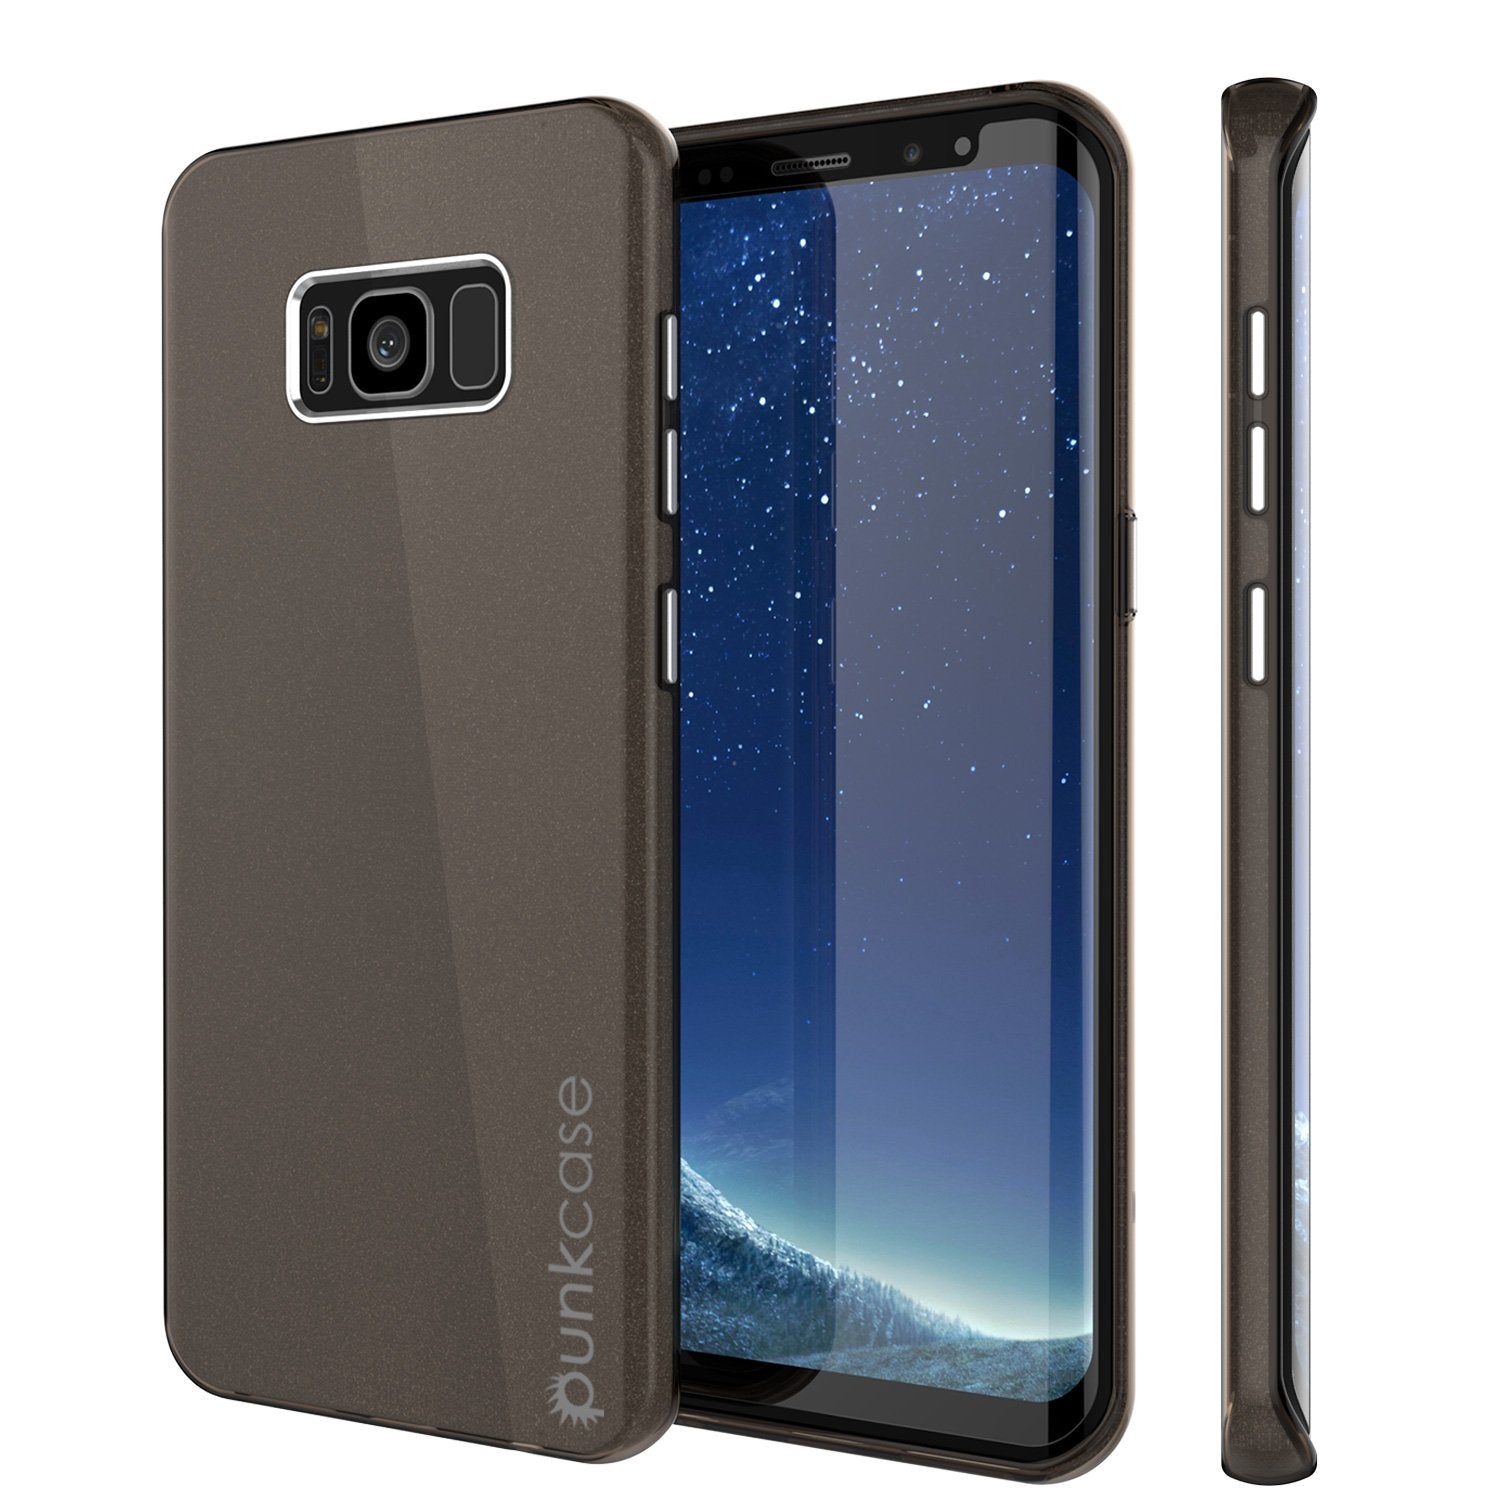 Galaxy S8 Plus Case, Punkcase Galactic 2.0 Series Ultra Slim Protective Armor TPU Cover [Black]